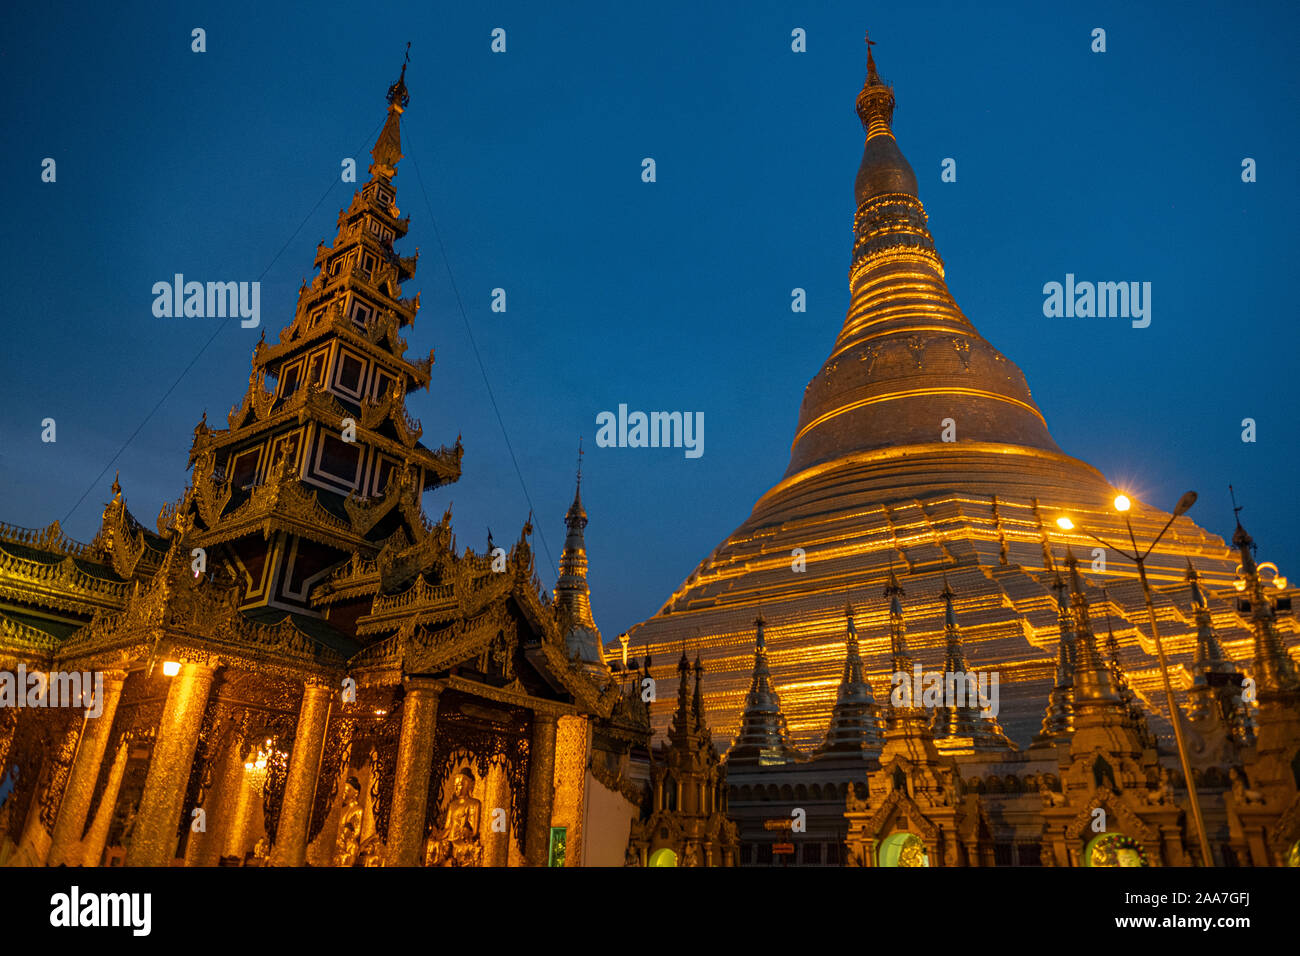 Shwedagon Pagoda and its numerous chapels bathed in gold leaf  in Yangon, Myanmar (Burma) against the background of a dark clear night sky Stock Photo